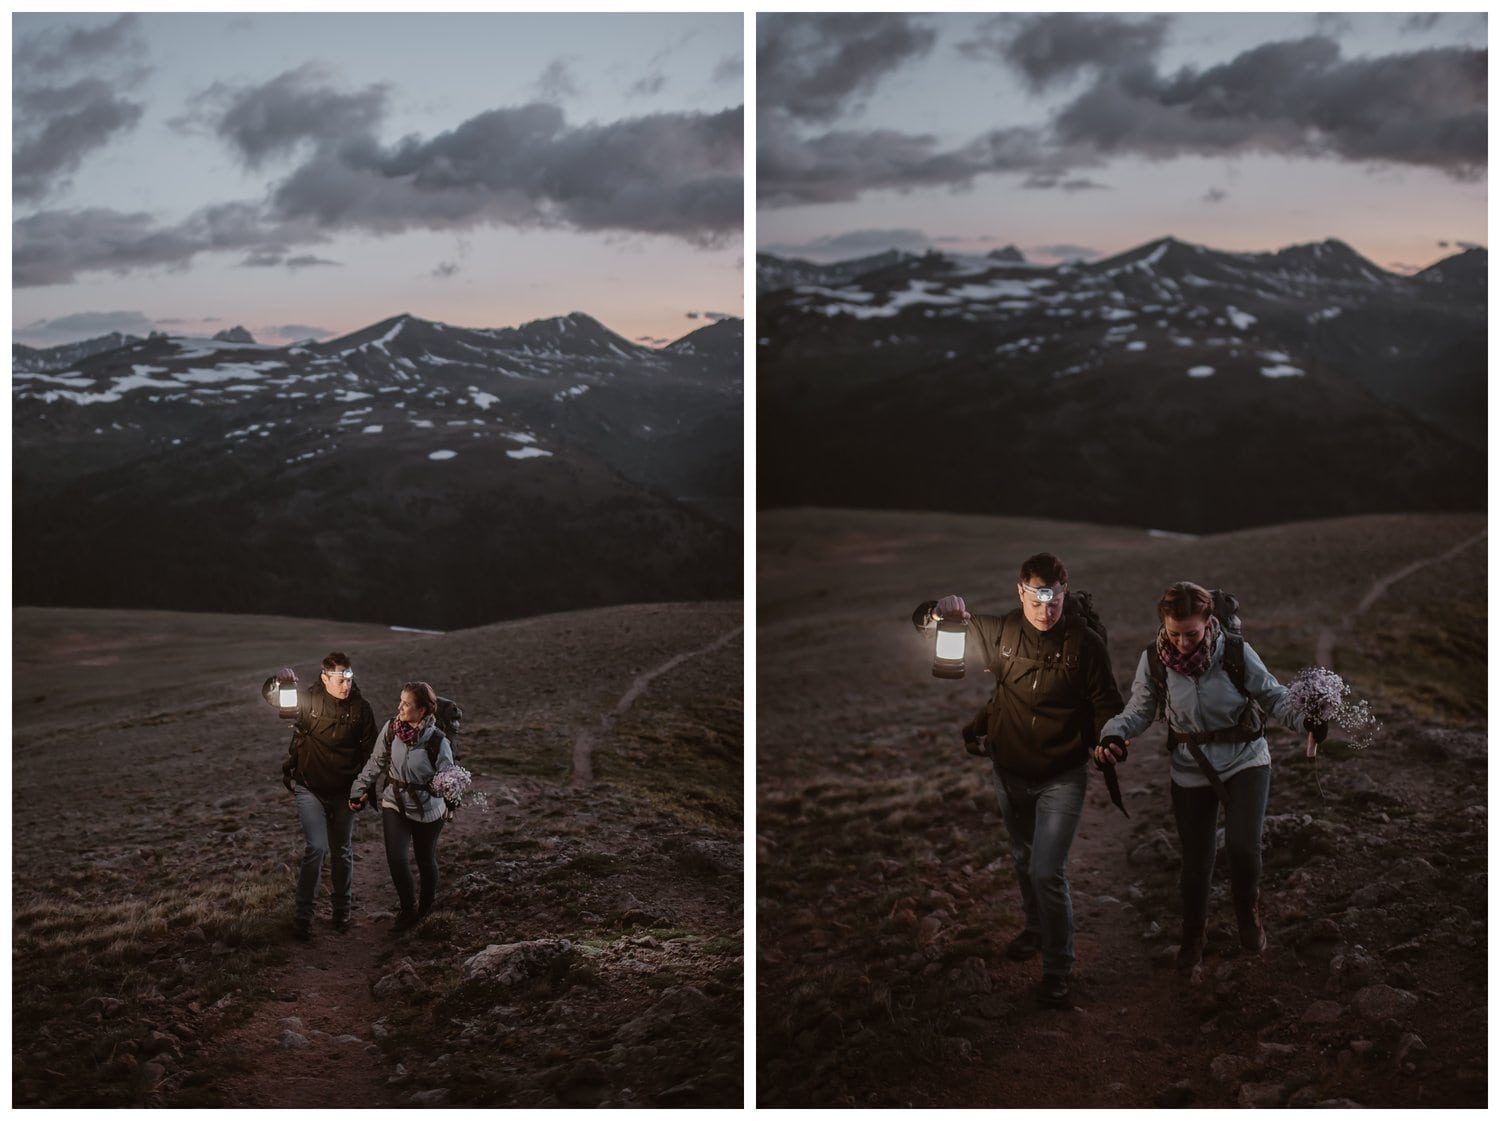 Bride and groom hold hands during a sunrise hiking elopement near Aspen, Colorado. The groom is holding a lantern and there are mountains in the background.